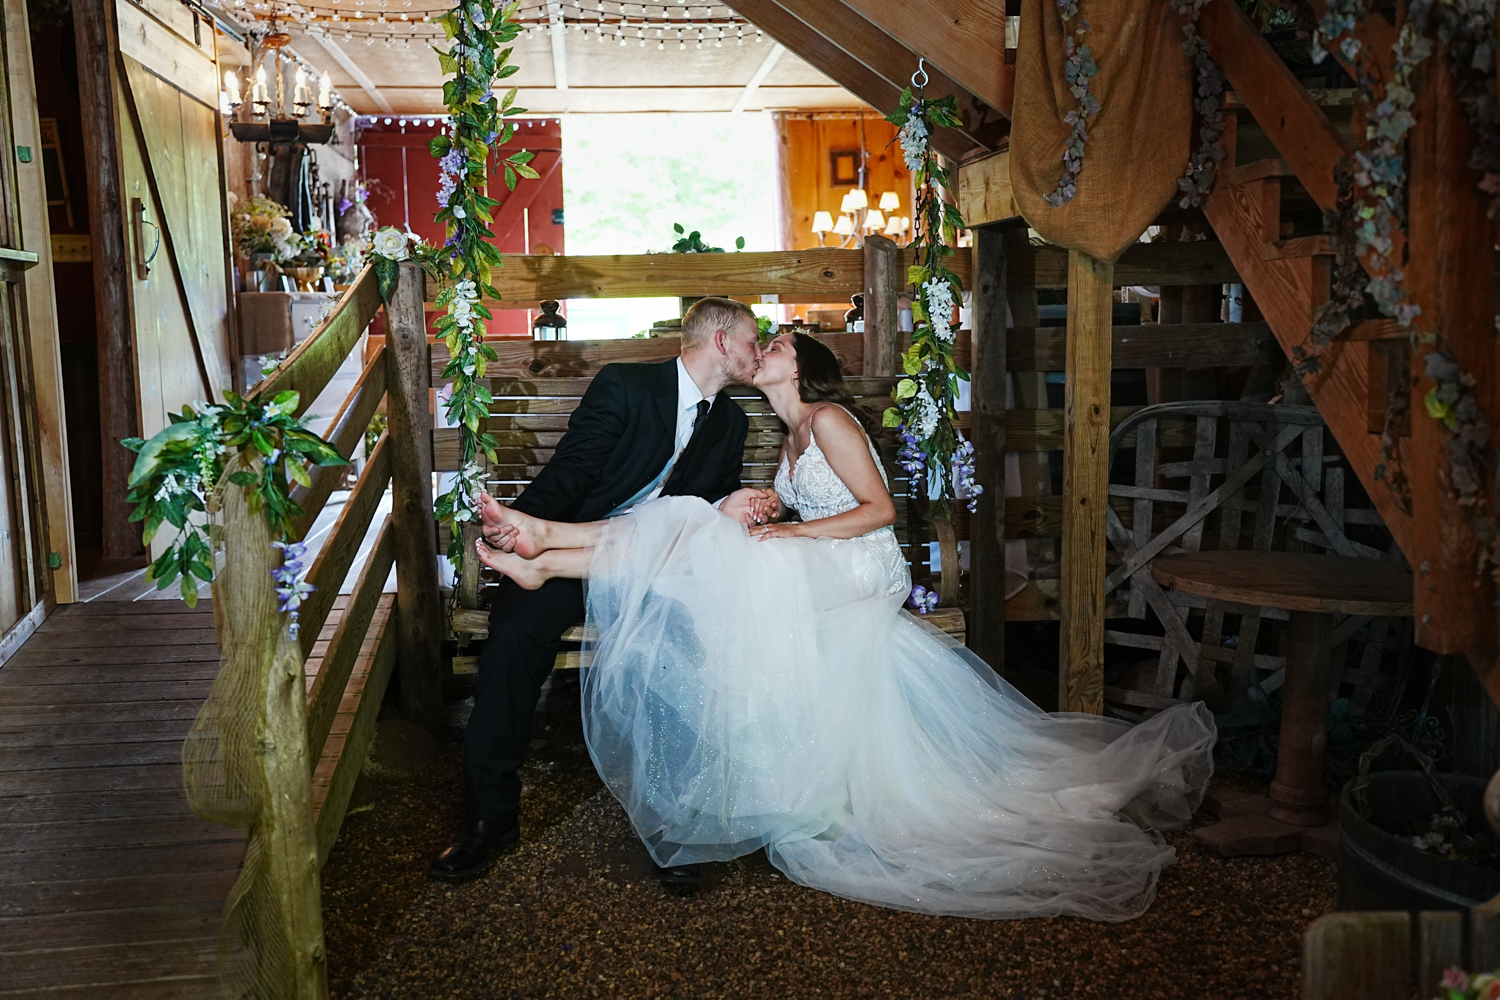 barefoot bride kissing her groom in a porch swing in a barn wedding venue in Pigeon Forge